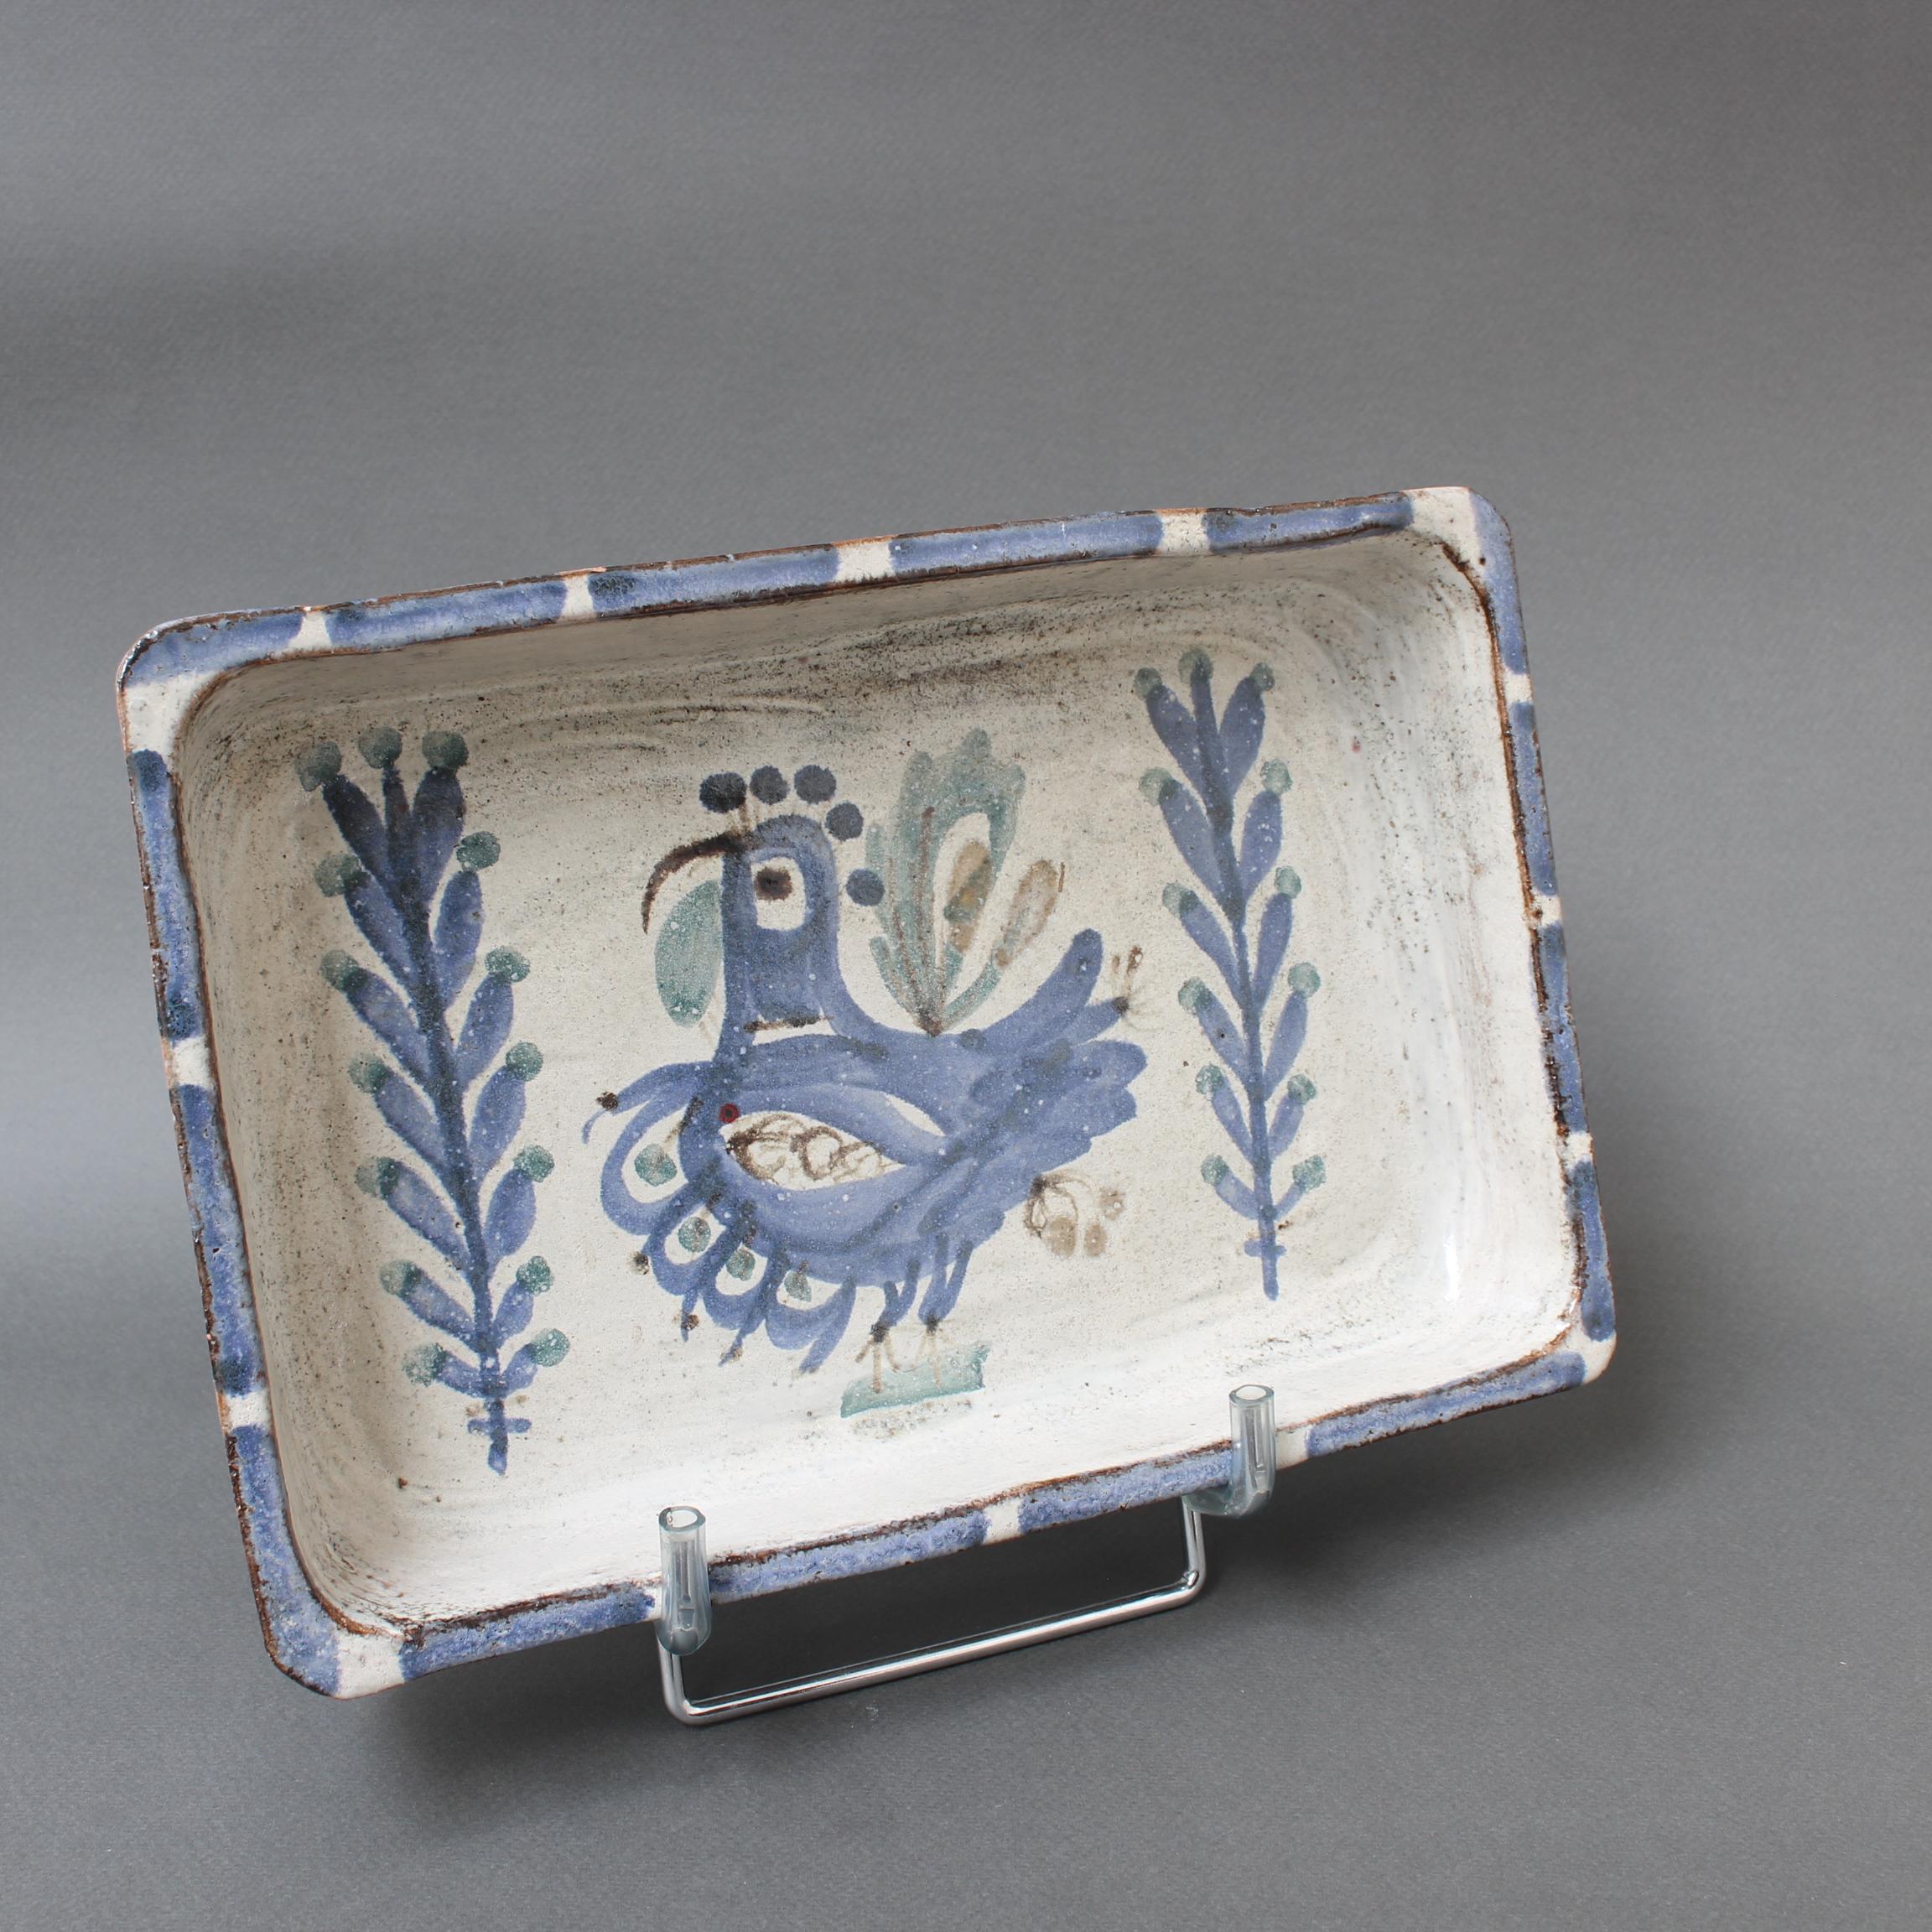 Mid-century French ceramic tray by Gustave Reynaud for Le Mûrier (circa 1960s). Rectangular-shaped tray (similar to a cake pan shape) with raised rim and slightly rounded ends in rustic earthenware. The base of the tray incorporates a delightful